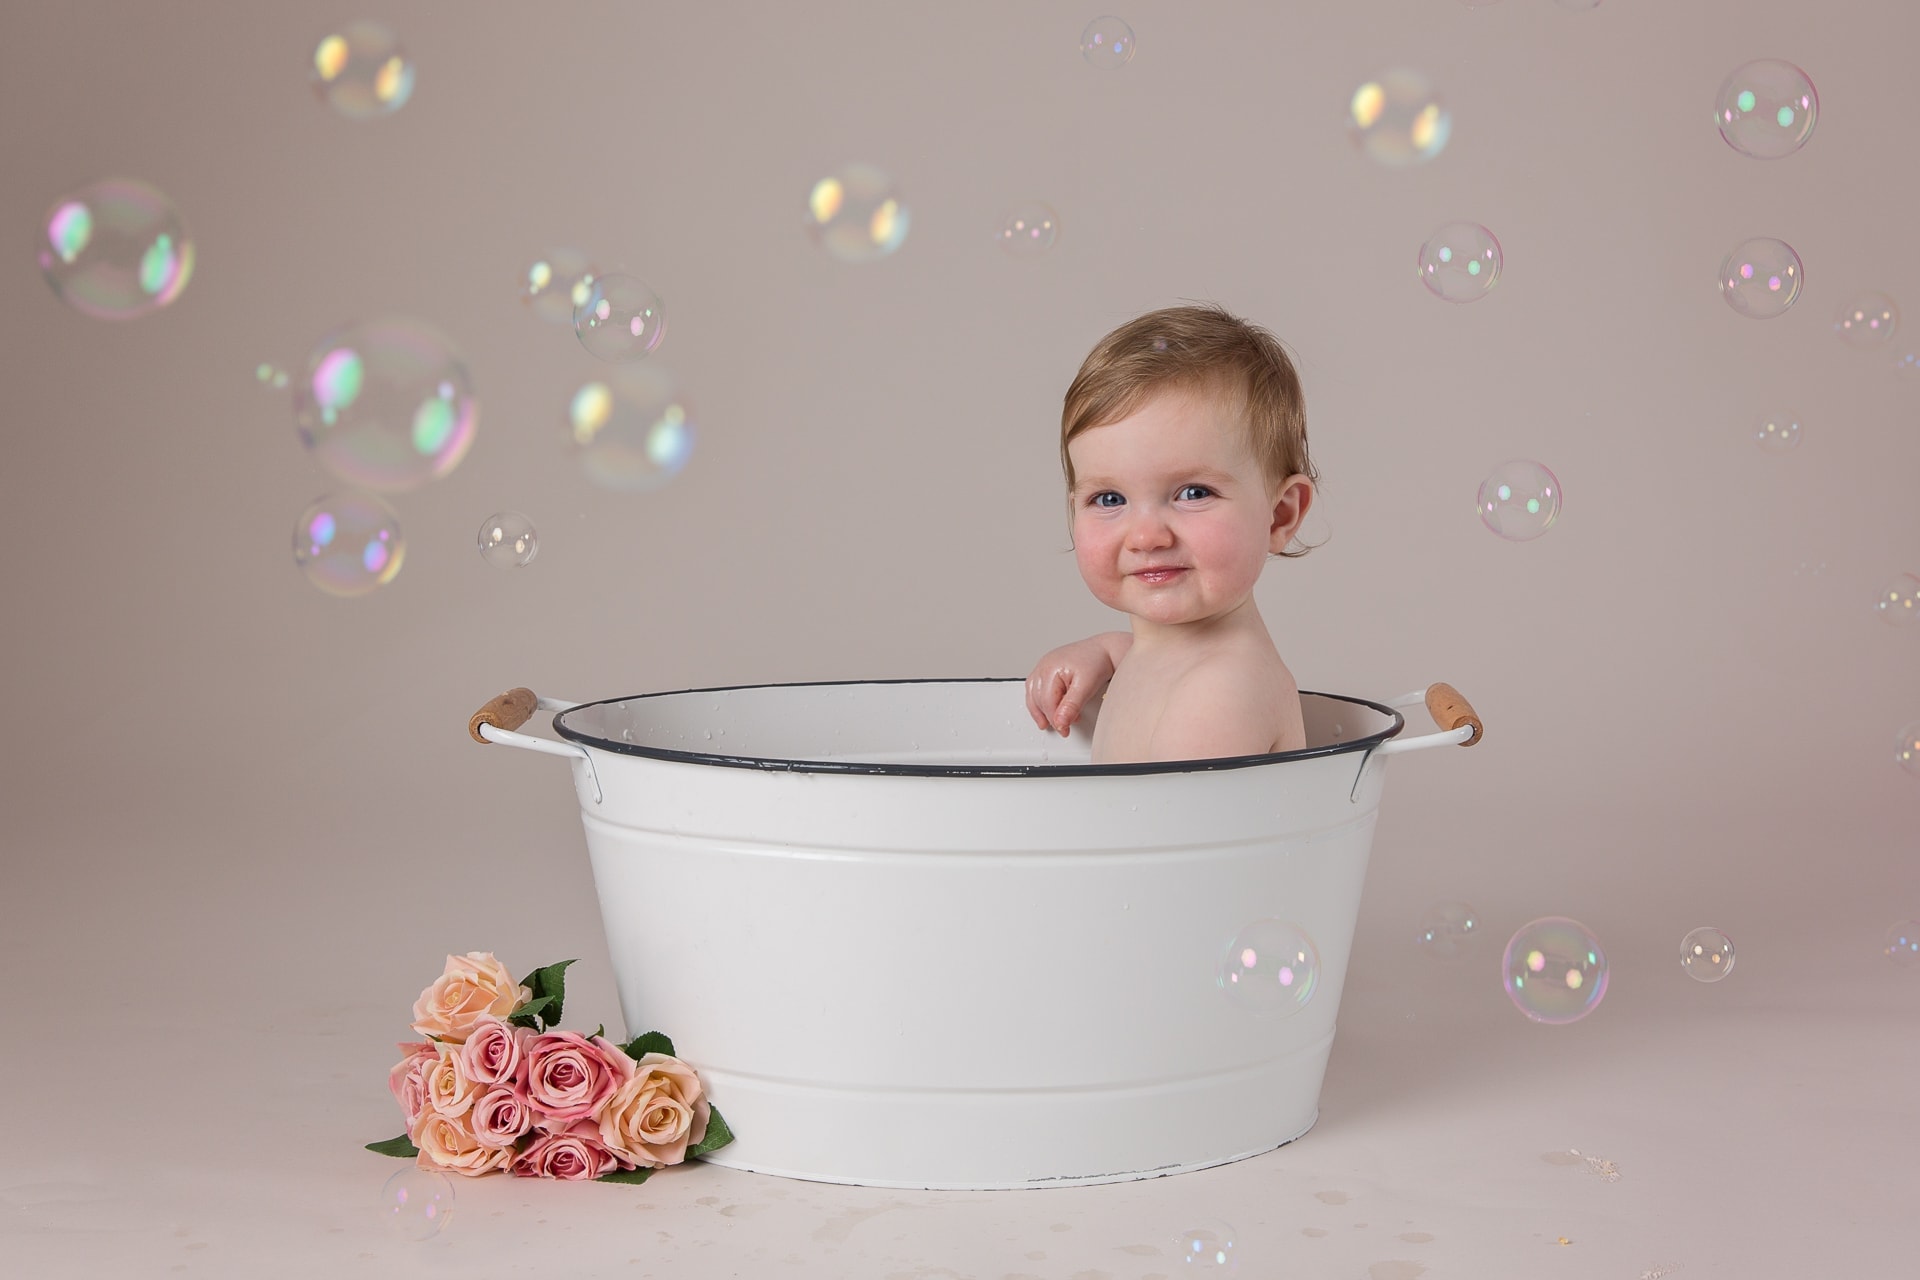 Baby girl in tub with bubbles and flowers on the floor for first birthday cake smash photography session